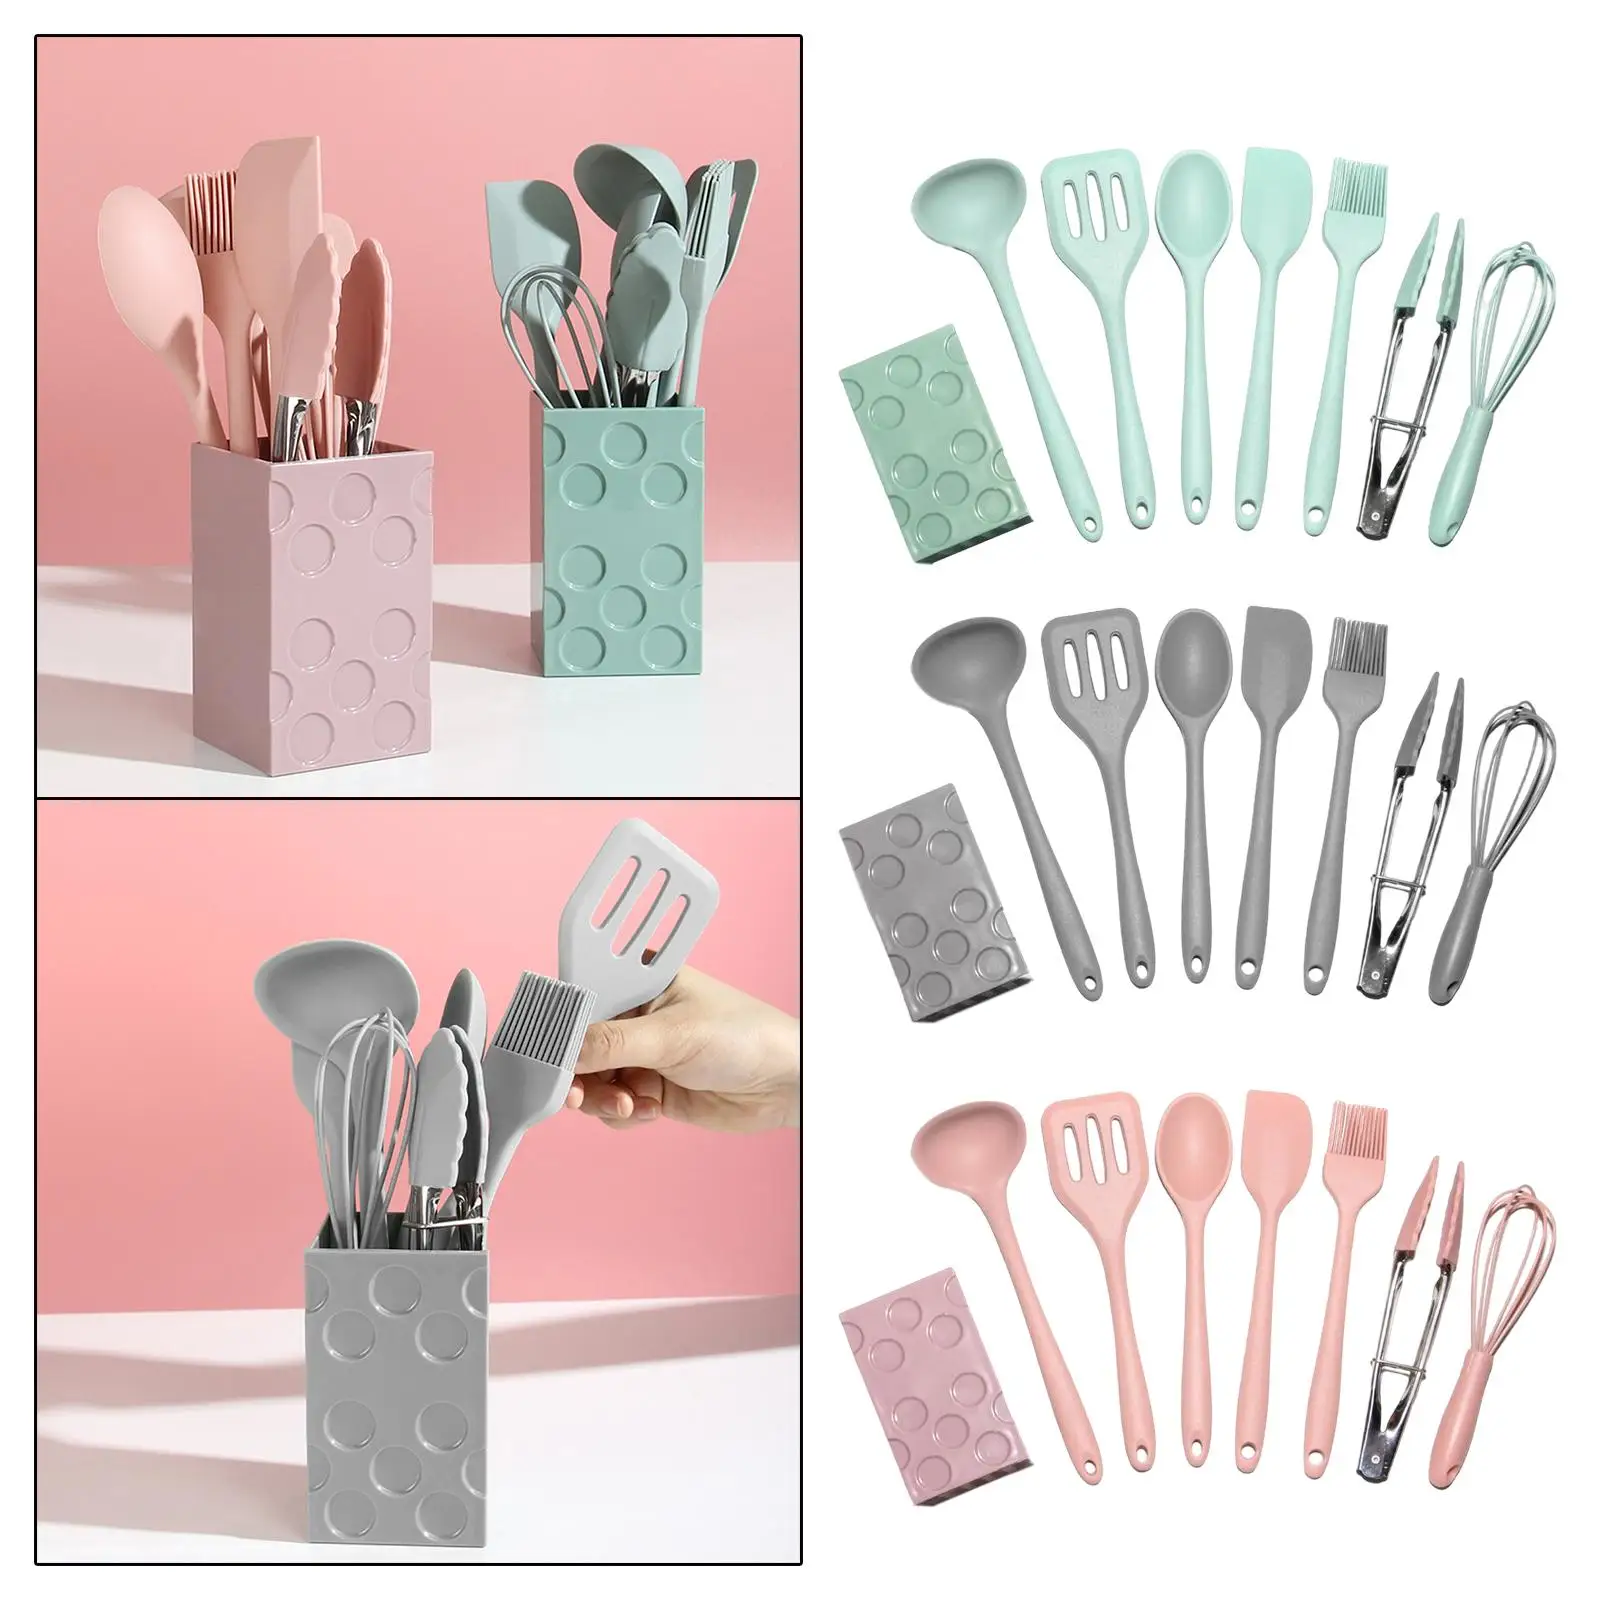 8Pcs Cooking Utensils Set Kitchenware Kitchen Tongs Soup Spoon for Household